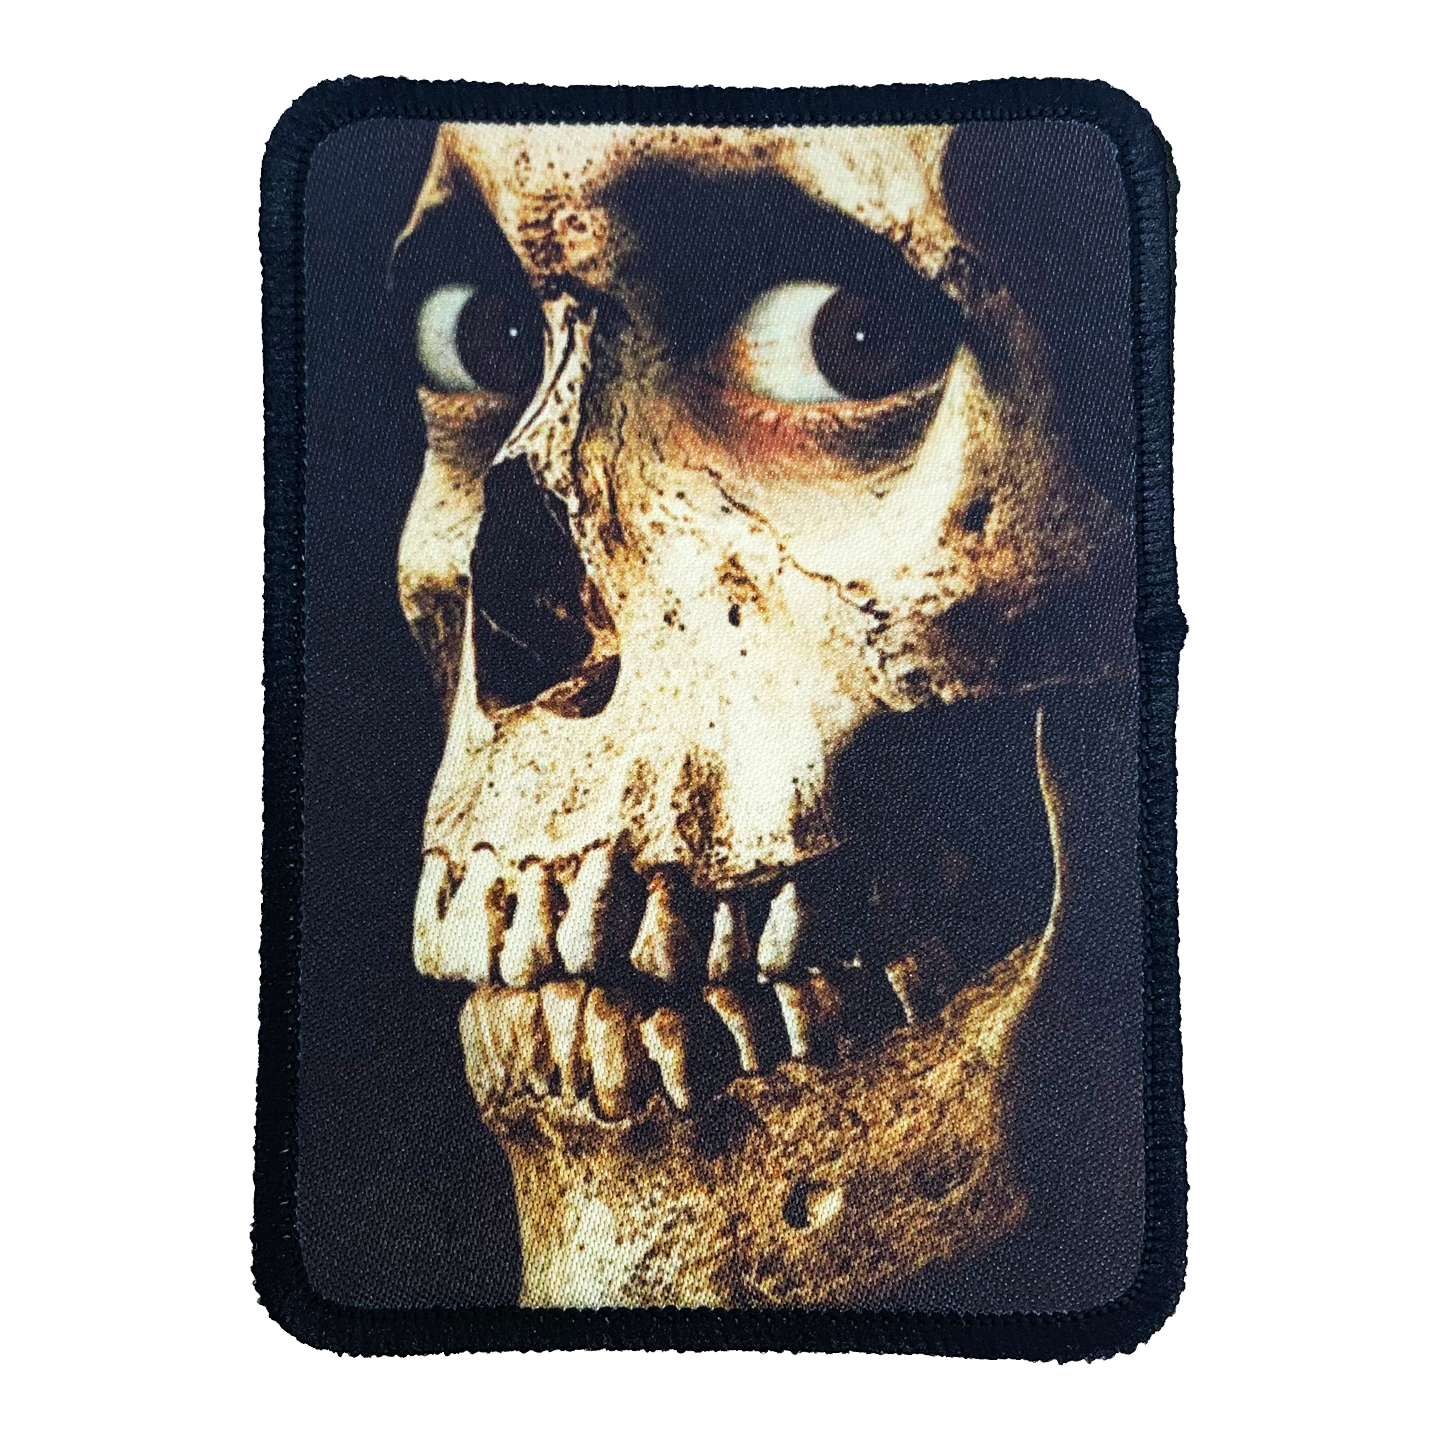 Evil Dead 2 Iron-On Patch - UNMASKED Horror & Punk Patches and Decor